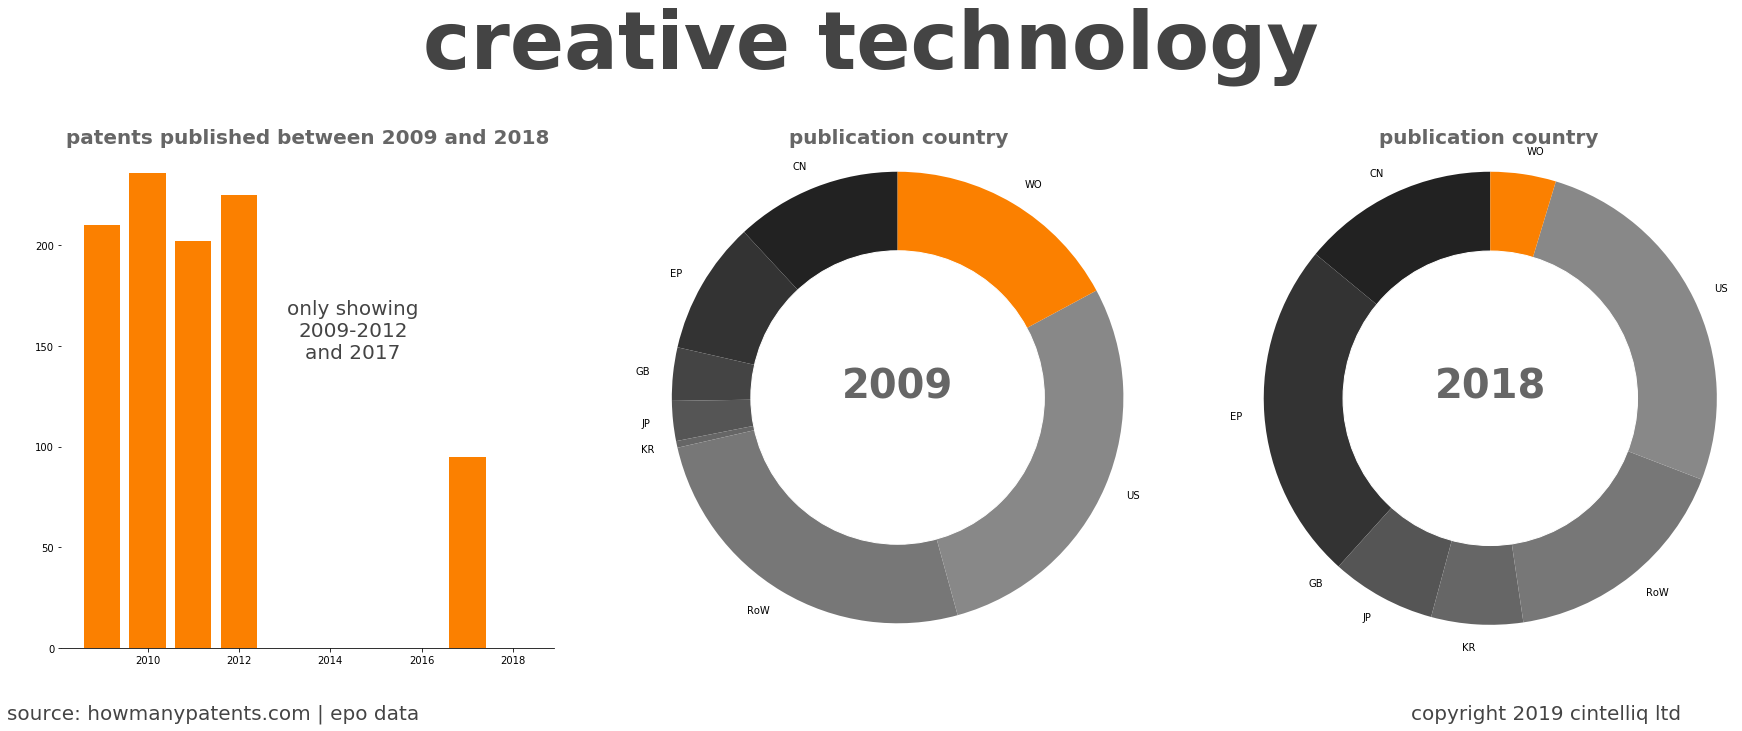 summary of patents for Creative Technology